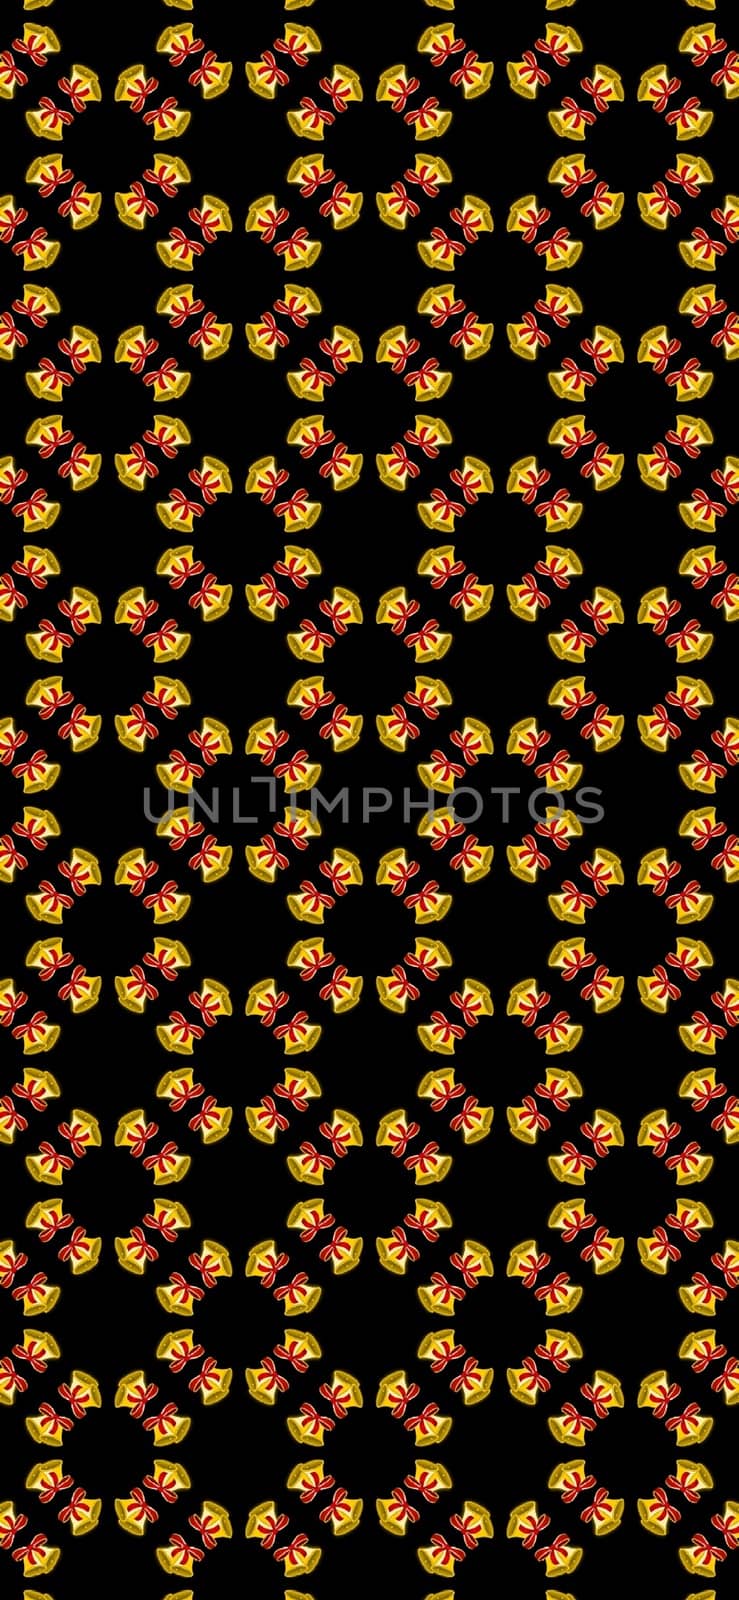 Abstract Christmas design. Repetitive geometric pattern.